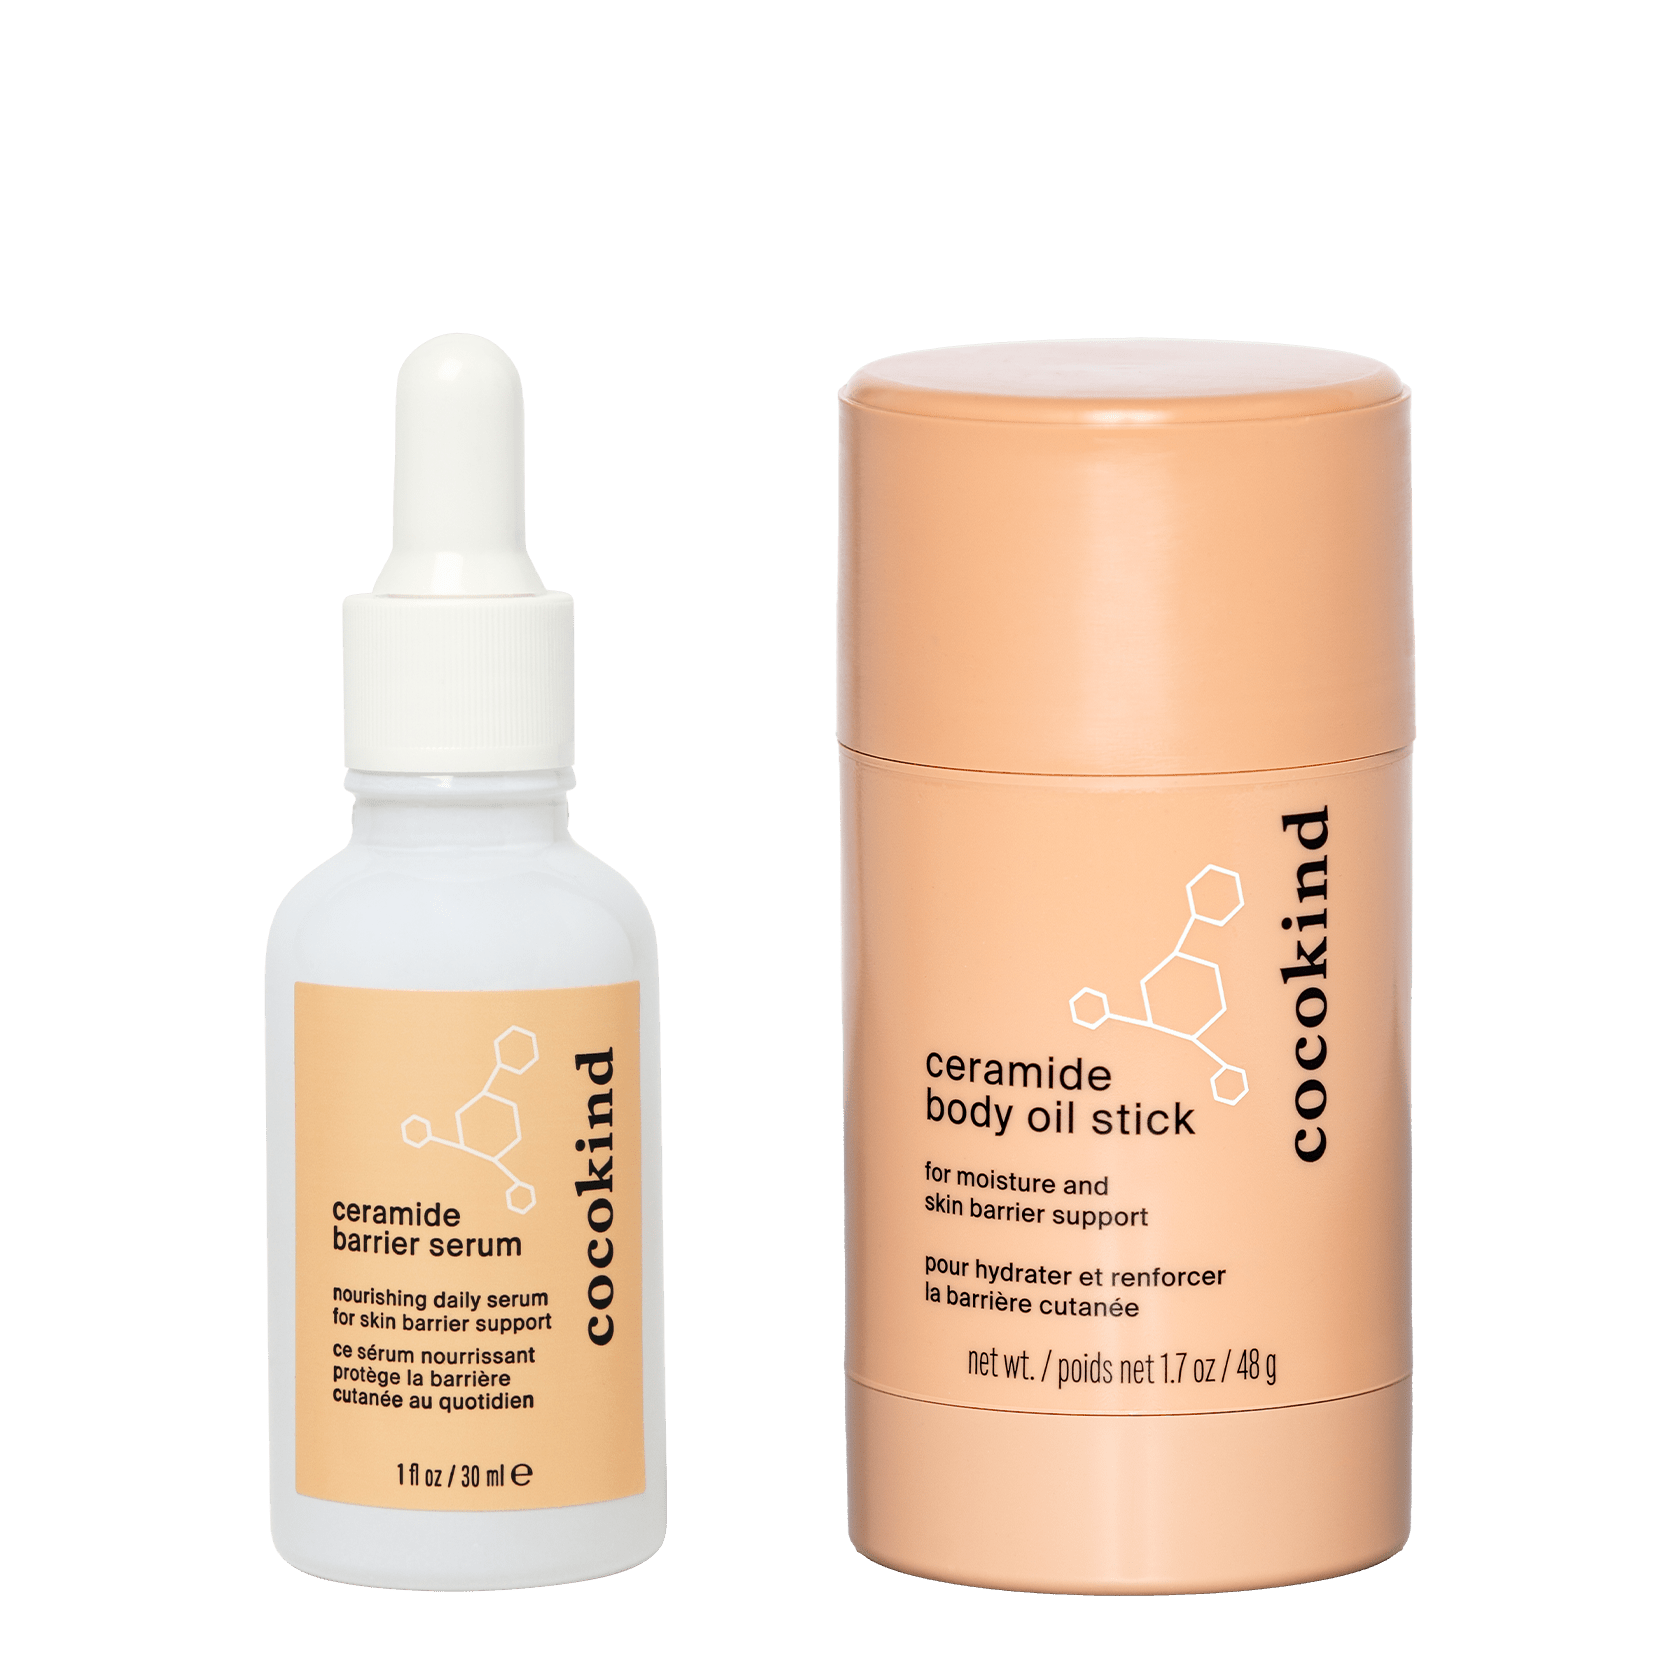 body duo– cocokind